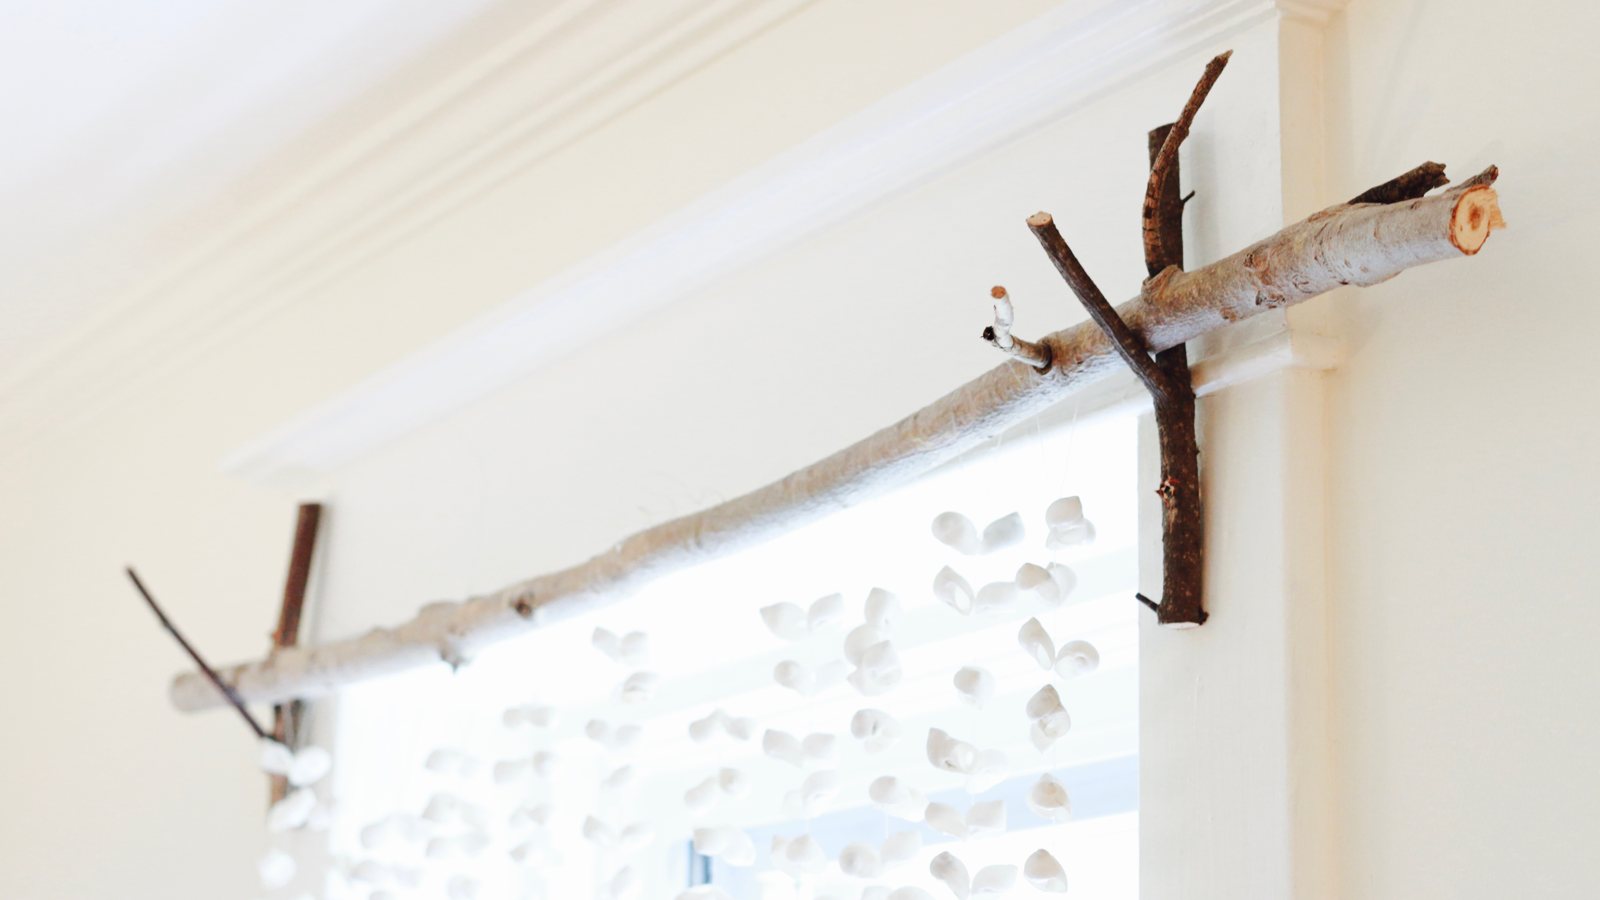 How to make homemade curtain rods with TWIGS! So beautiful & easy to do! | DESIGN THE LIFE YOU WANT TO LIVE | www.lynneknowlton.com